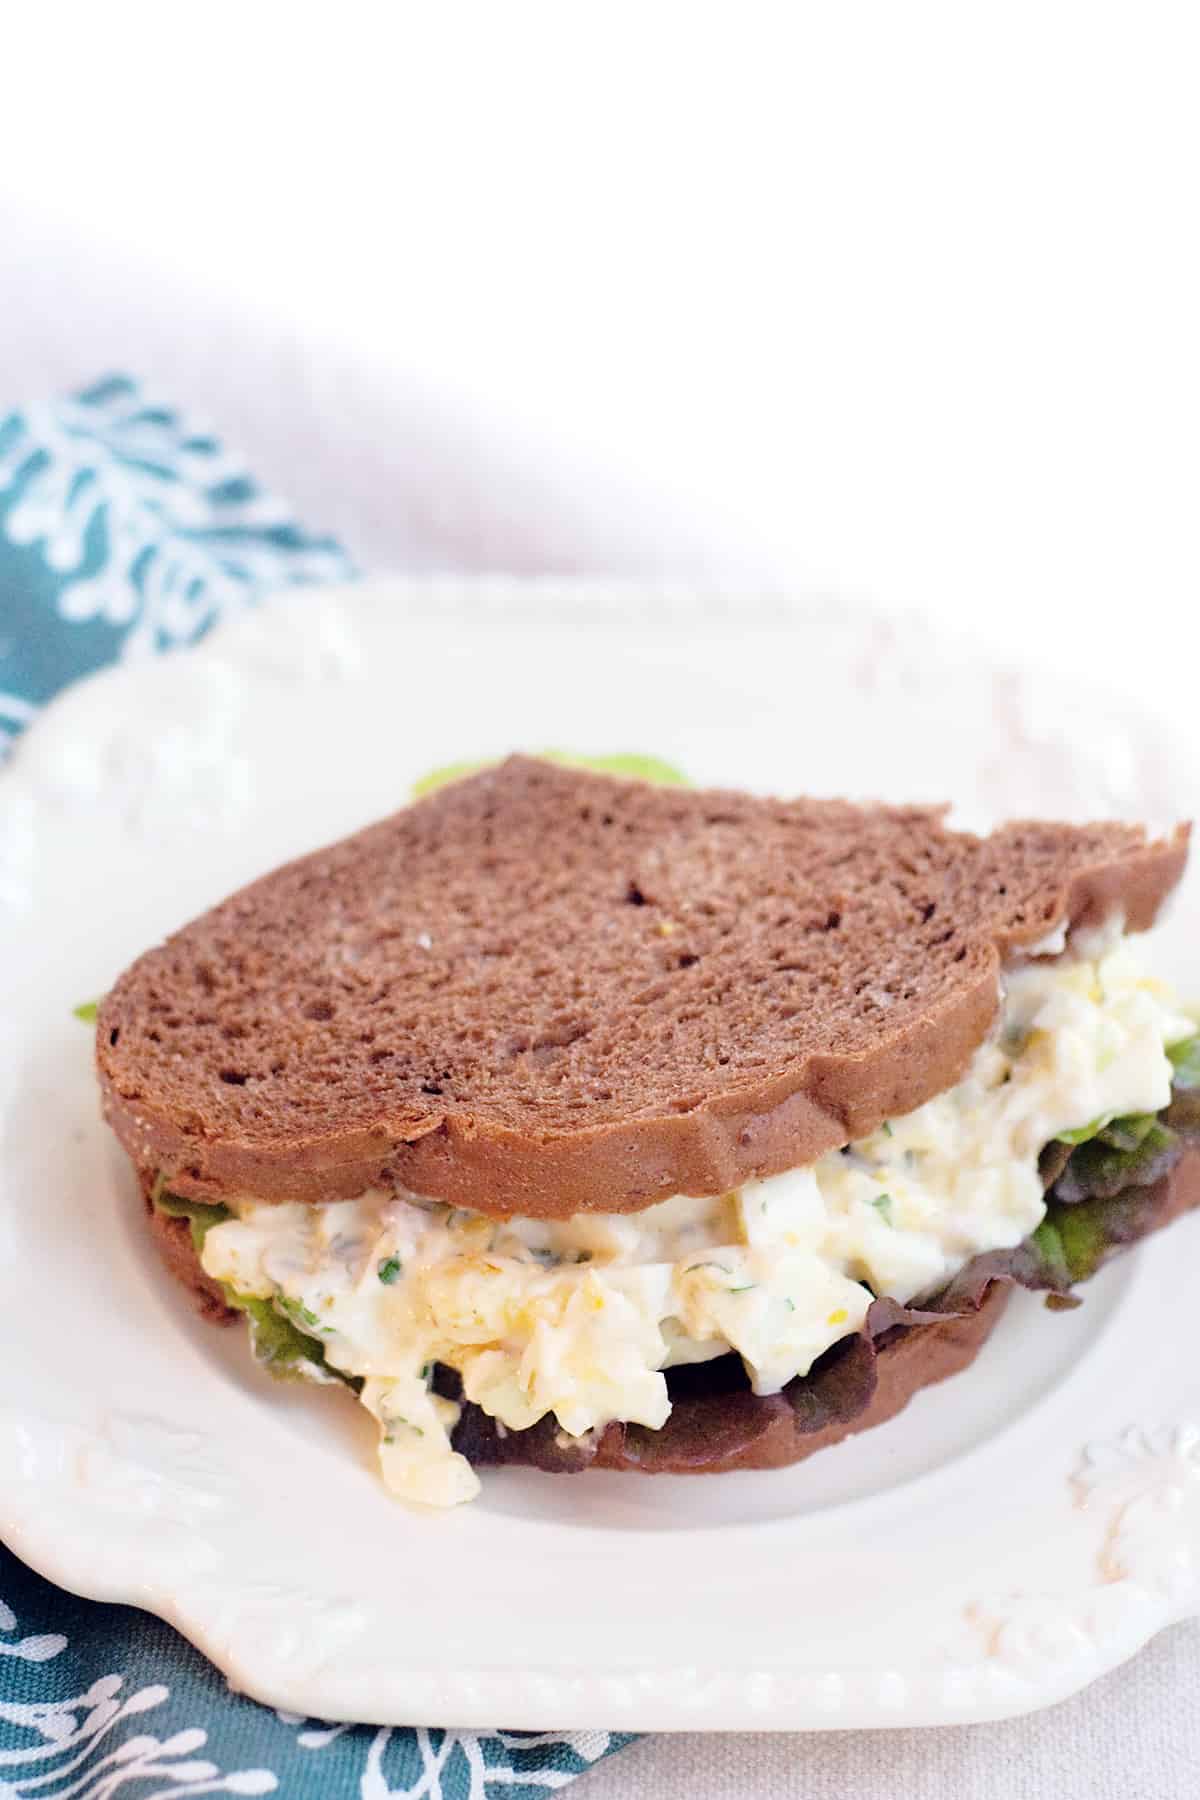 Herbed egg salad sandwich on a white serving plate.